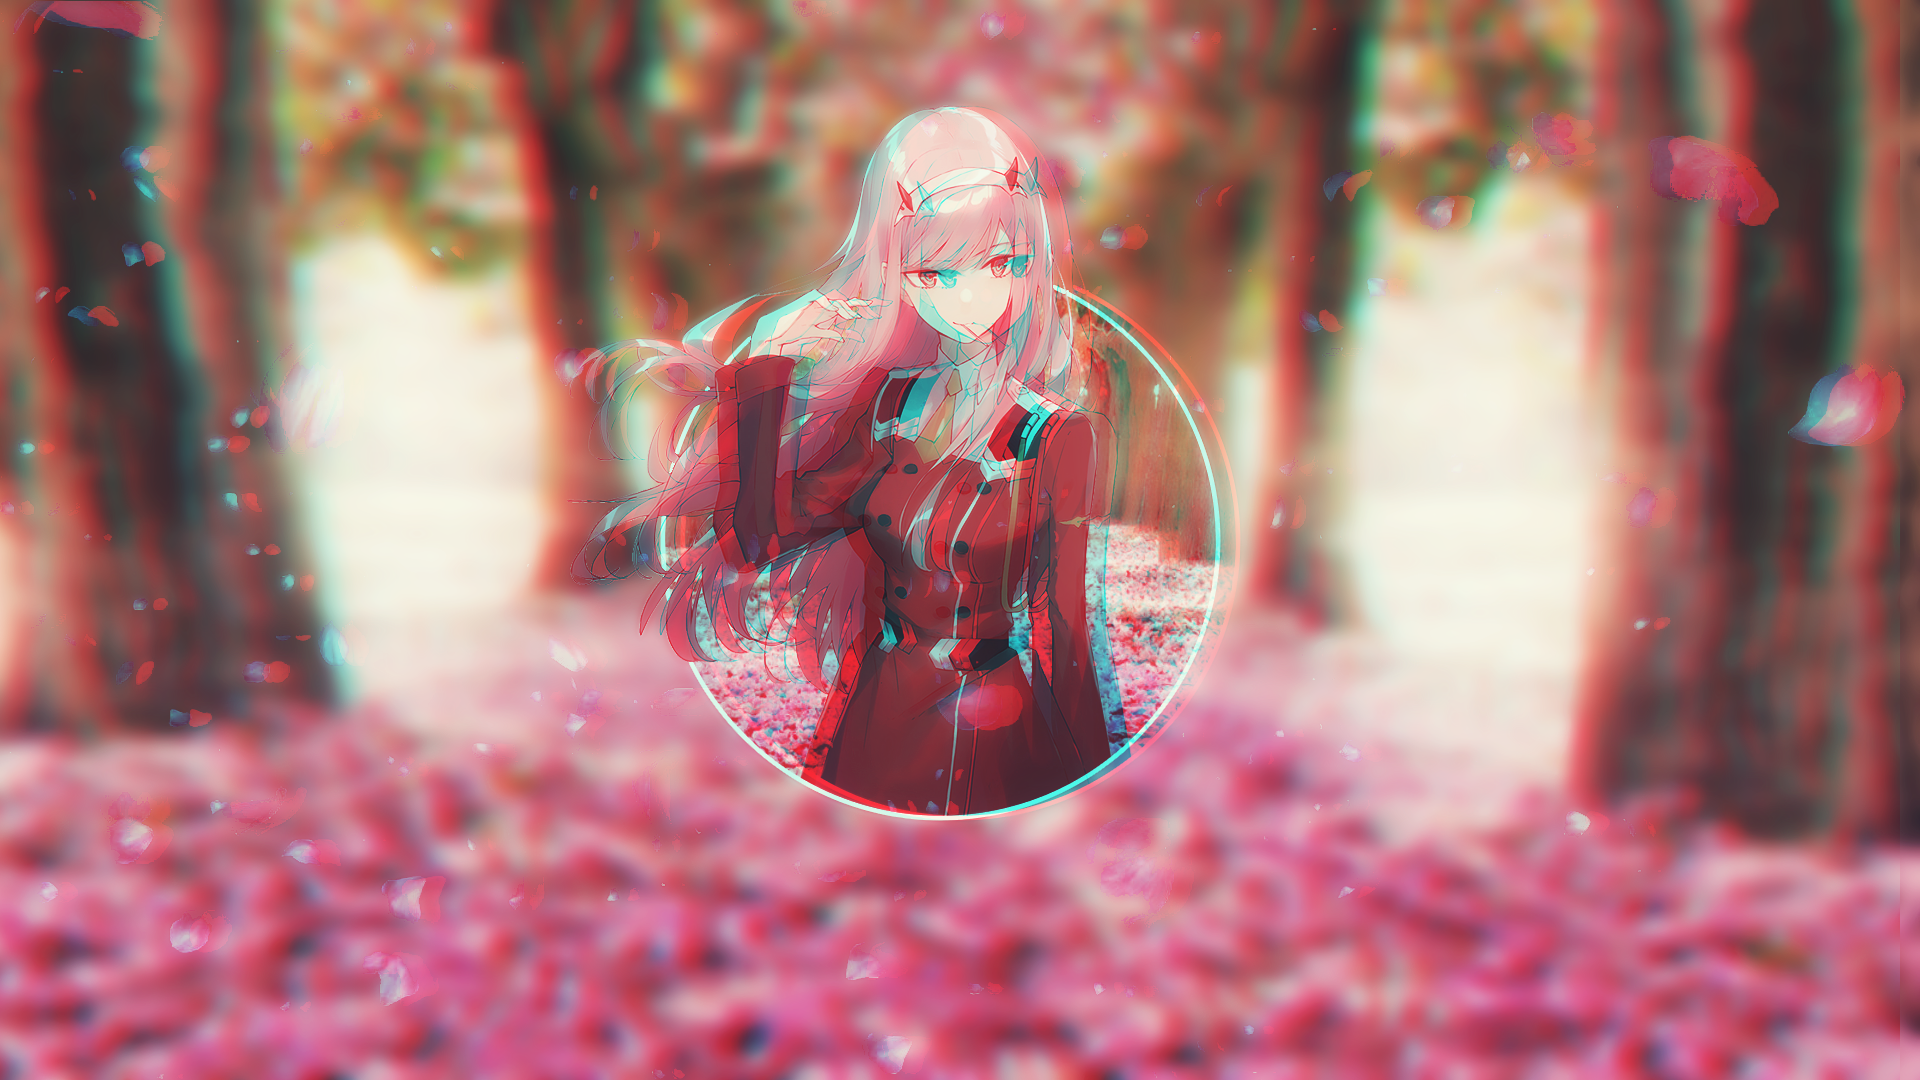 Anime 1920x1080 anime girls picture-in-picture Darling in the FranXX Zero Two (Darling in the FranXX)